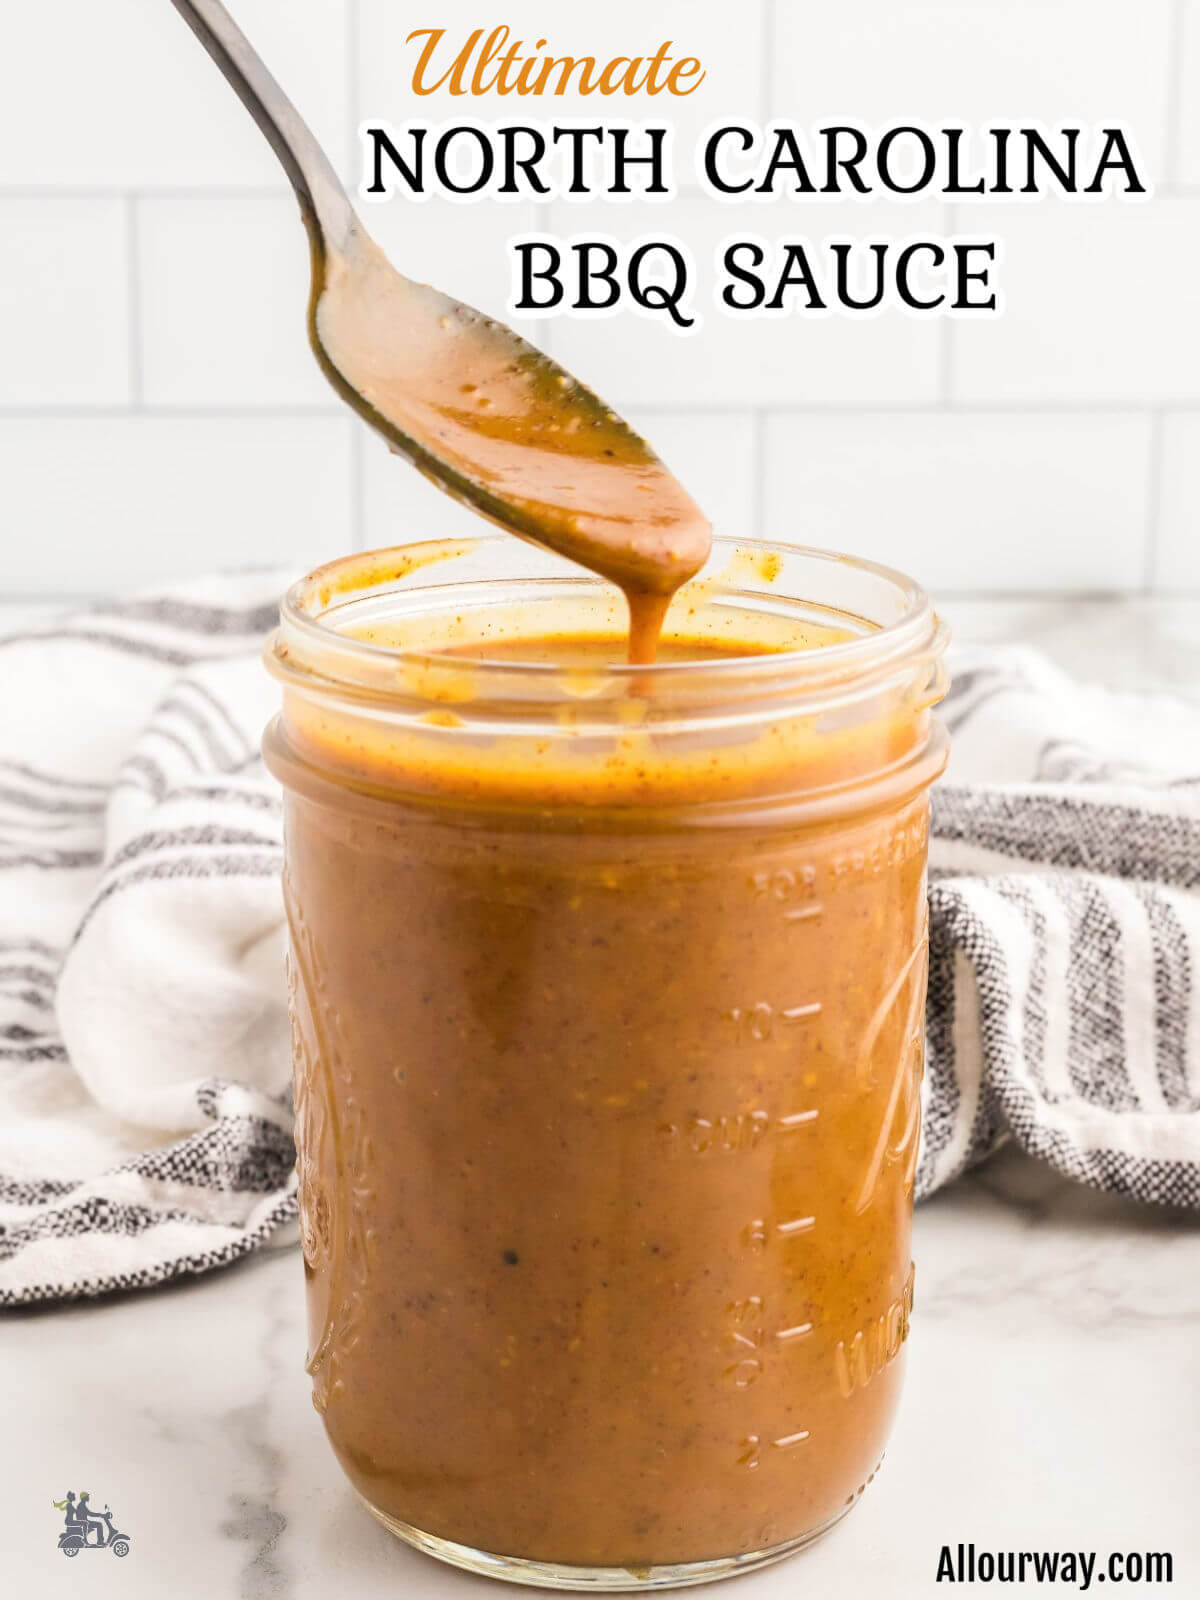 Social Media Image with Title Overlay of a jelly jar filled with North Carolina BBQ Sauce.